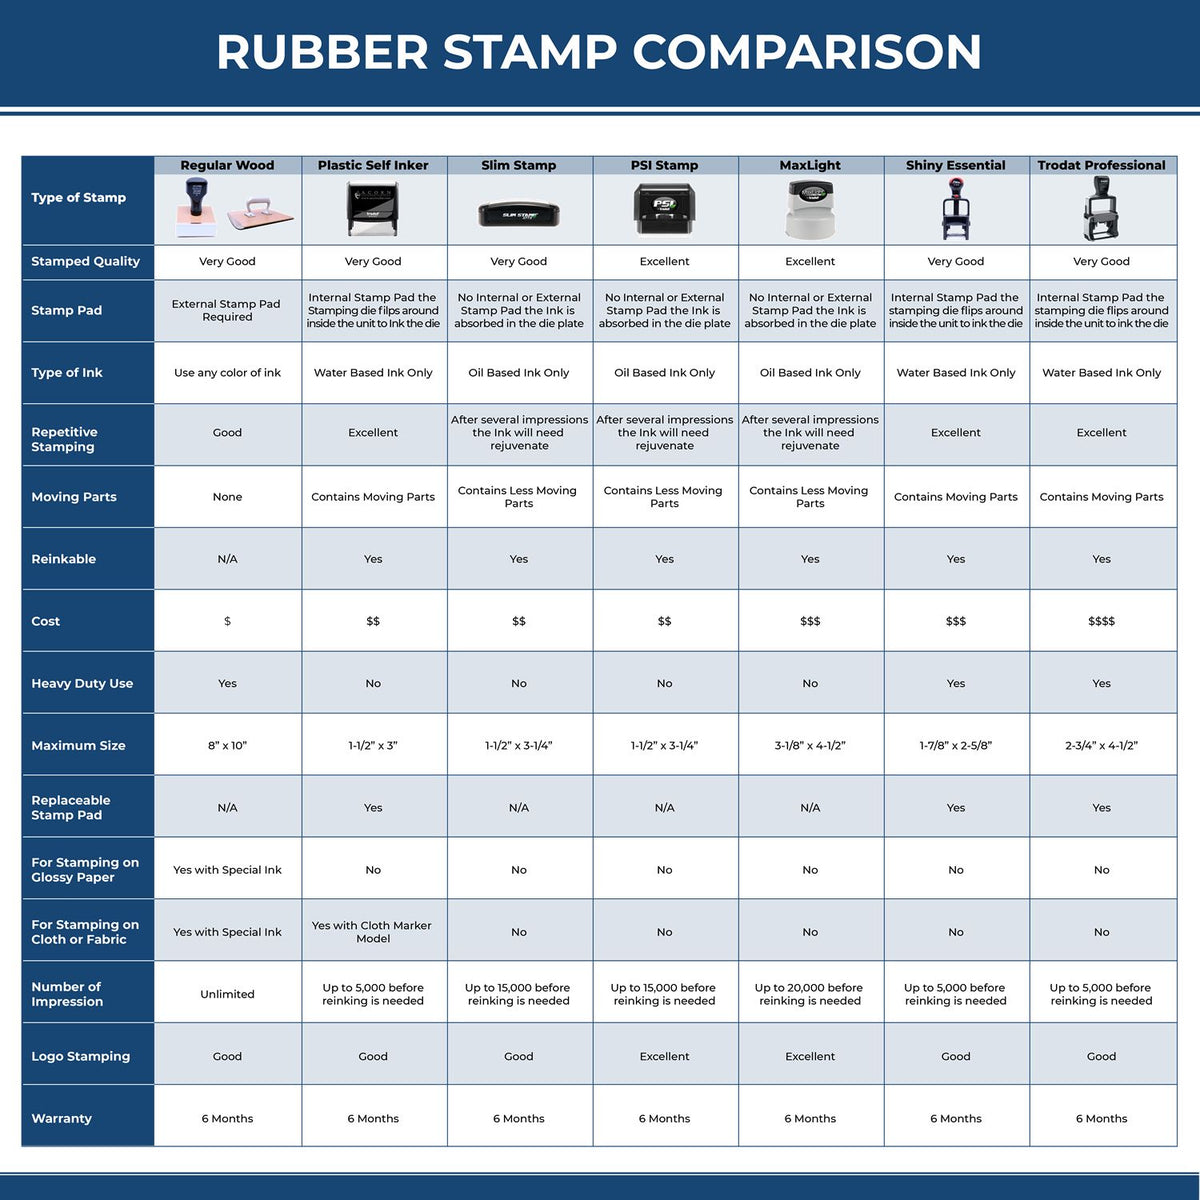 Large Self Inking Copy For Your Information Stamp 4116S Rubber Stamp Comparison